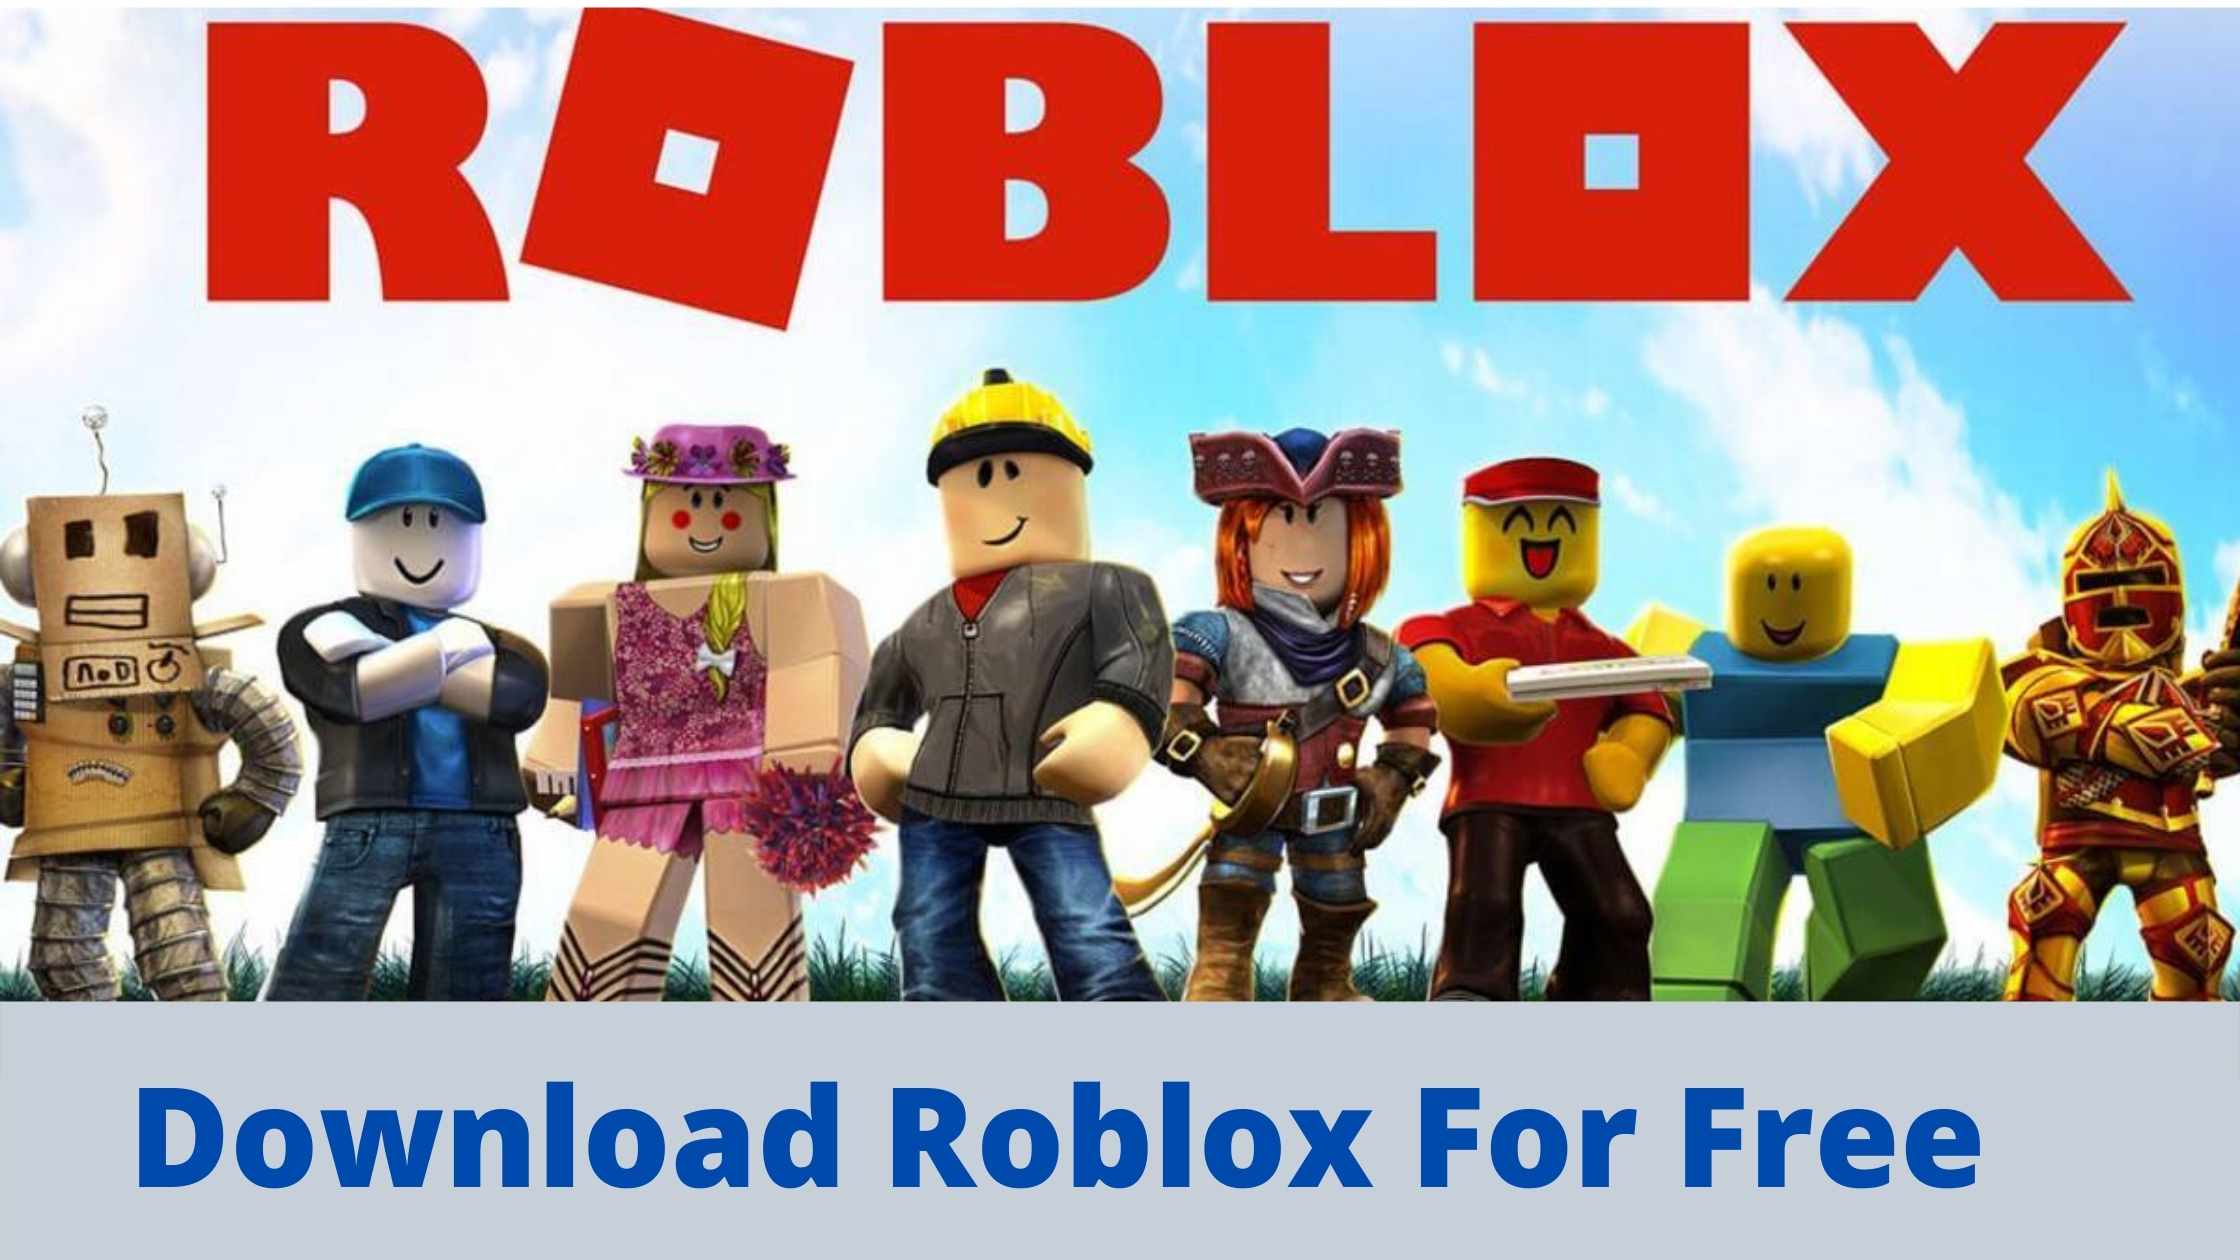 Download Roblox For Free